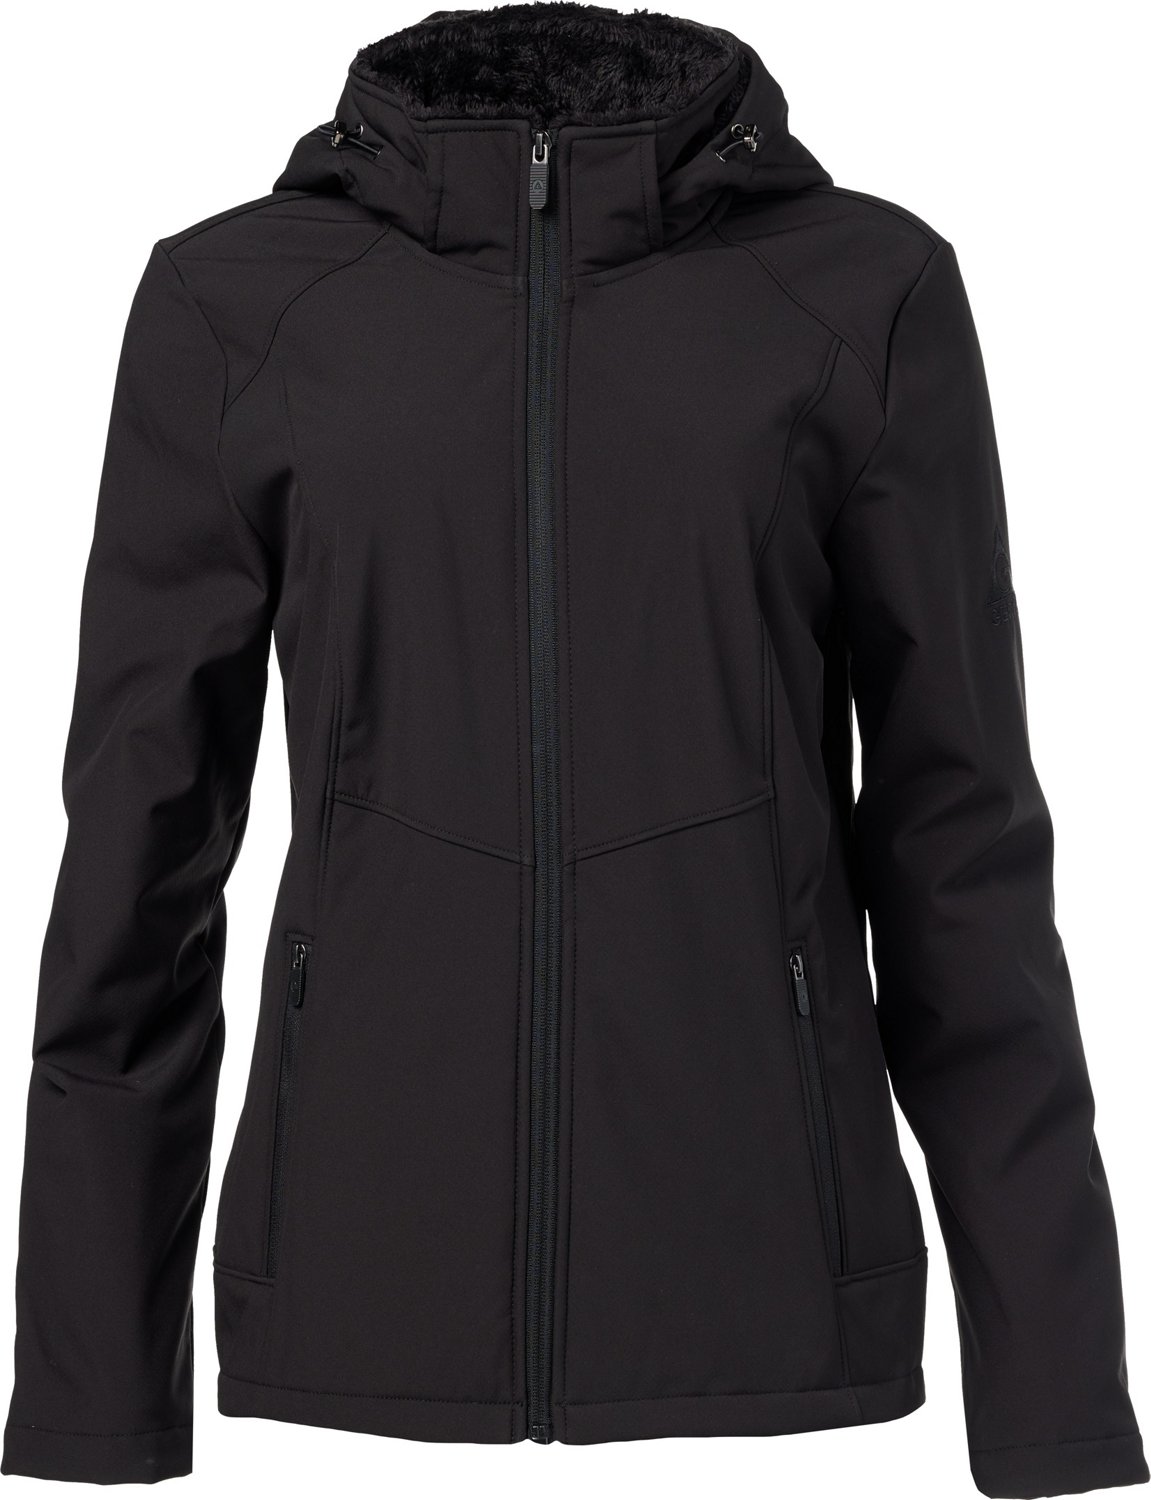 Gerry Women's Lilly Softshell Jacket | Free Shipping at Academy